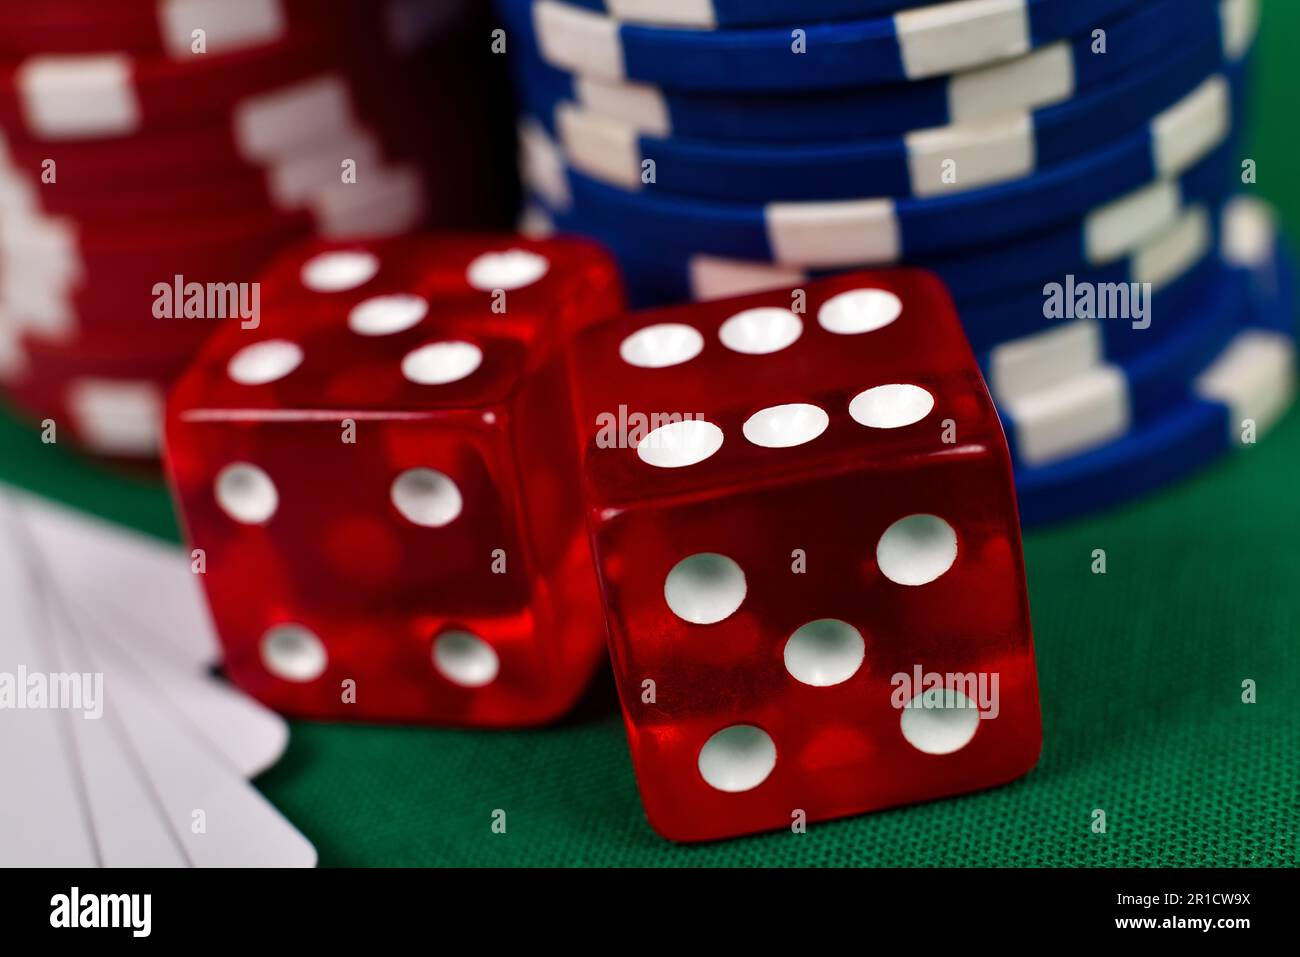 two red dice and poker chips on green table, close up Stock Photo